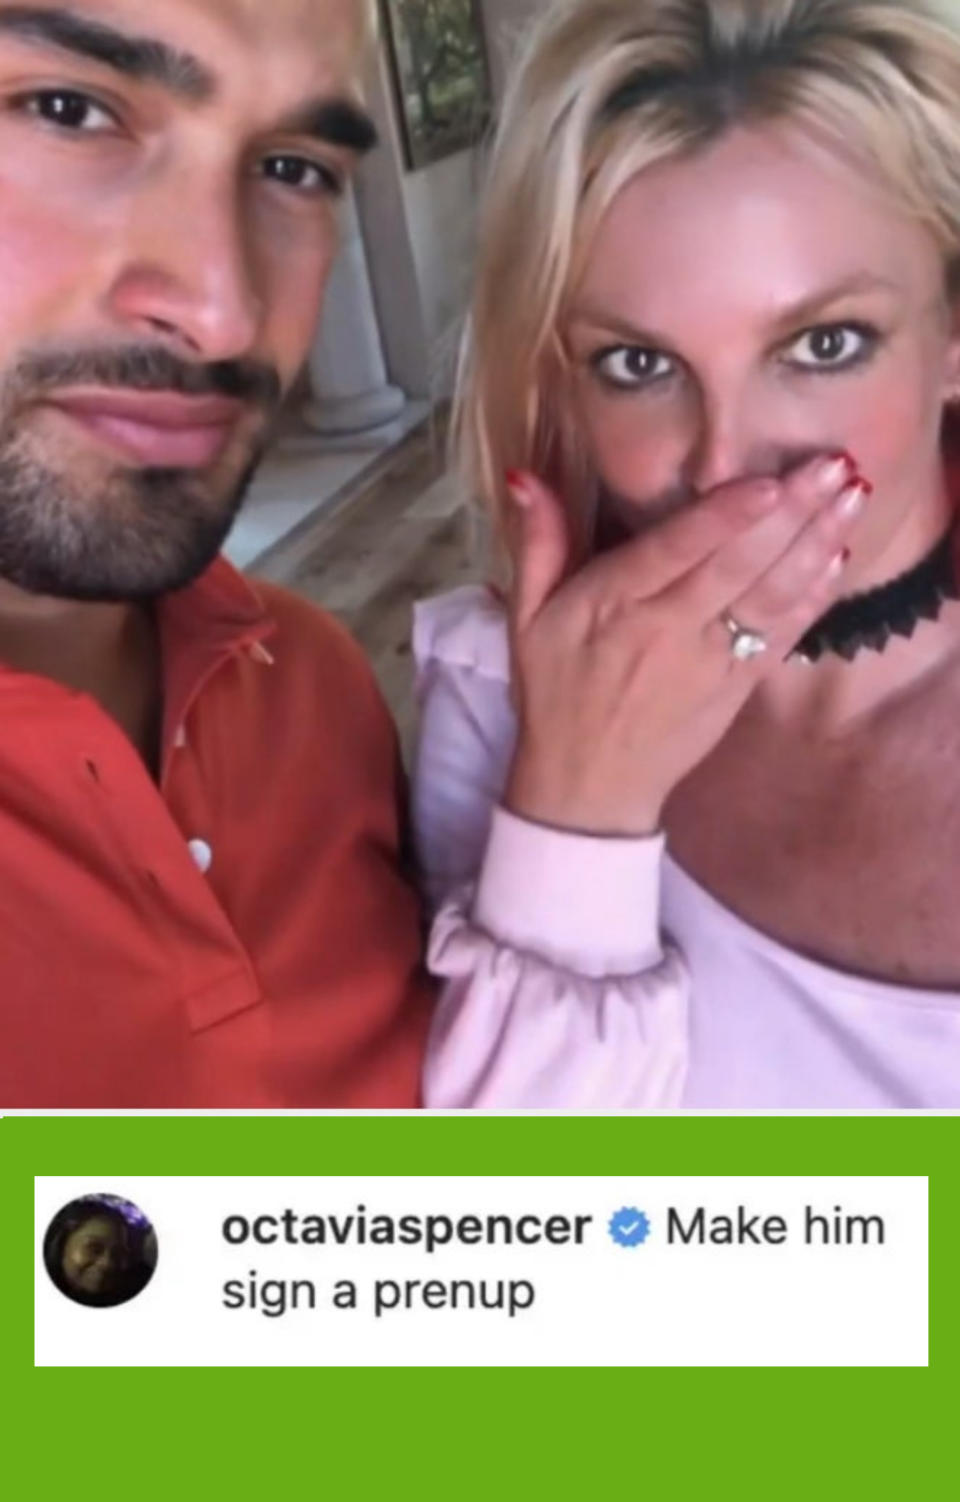 Spears announcing her engagement; Spencer's comment: "Make him sign a prenup"